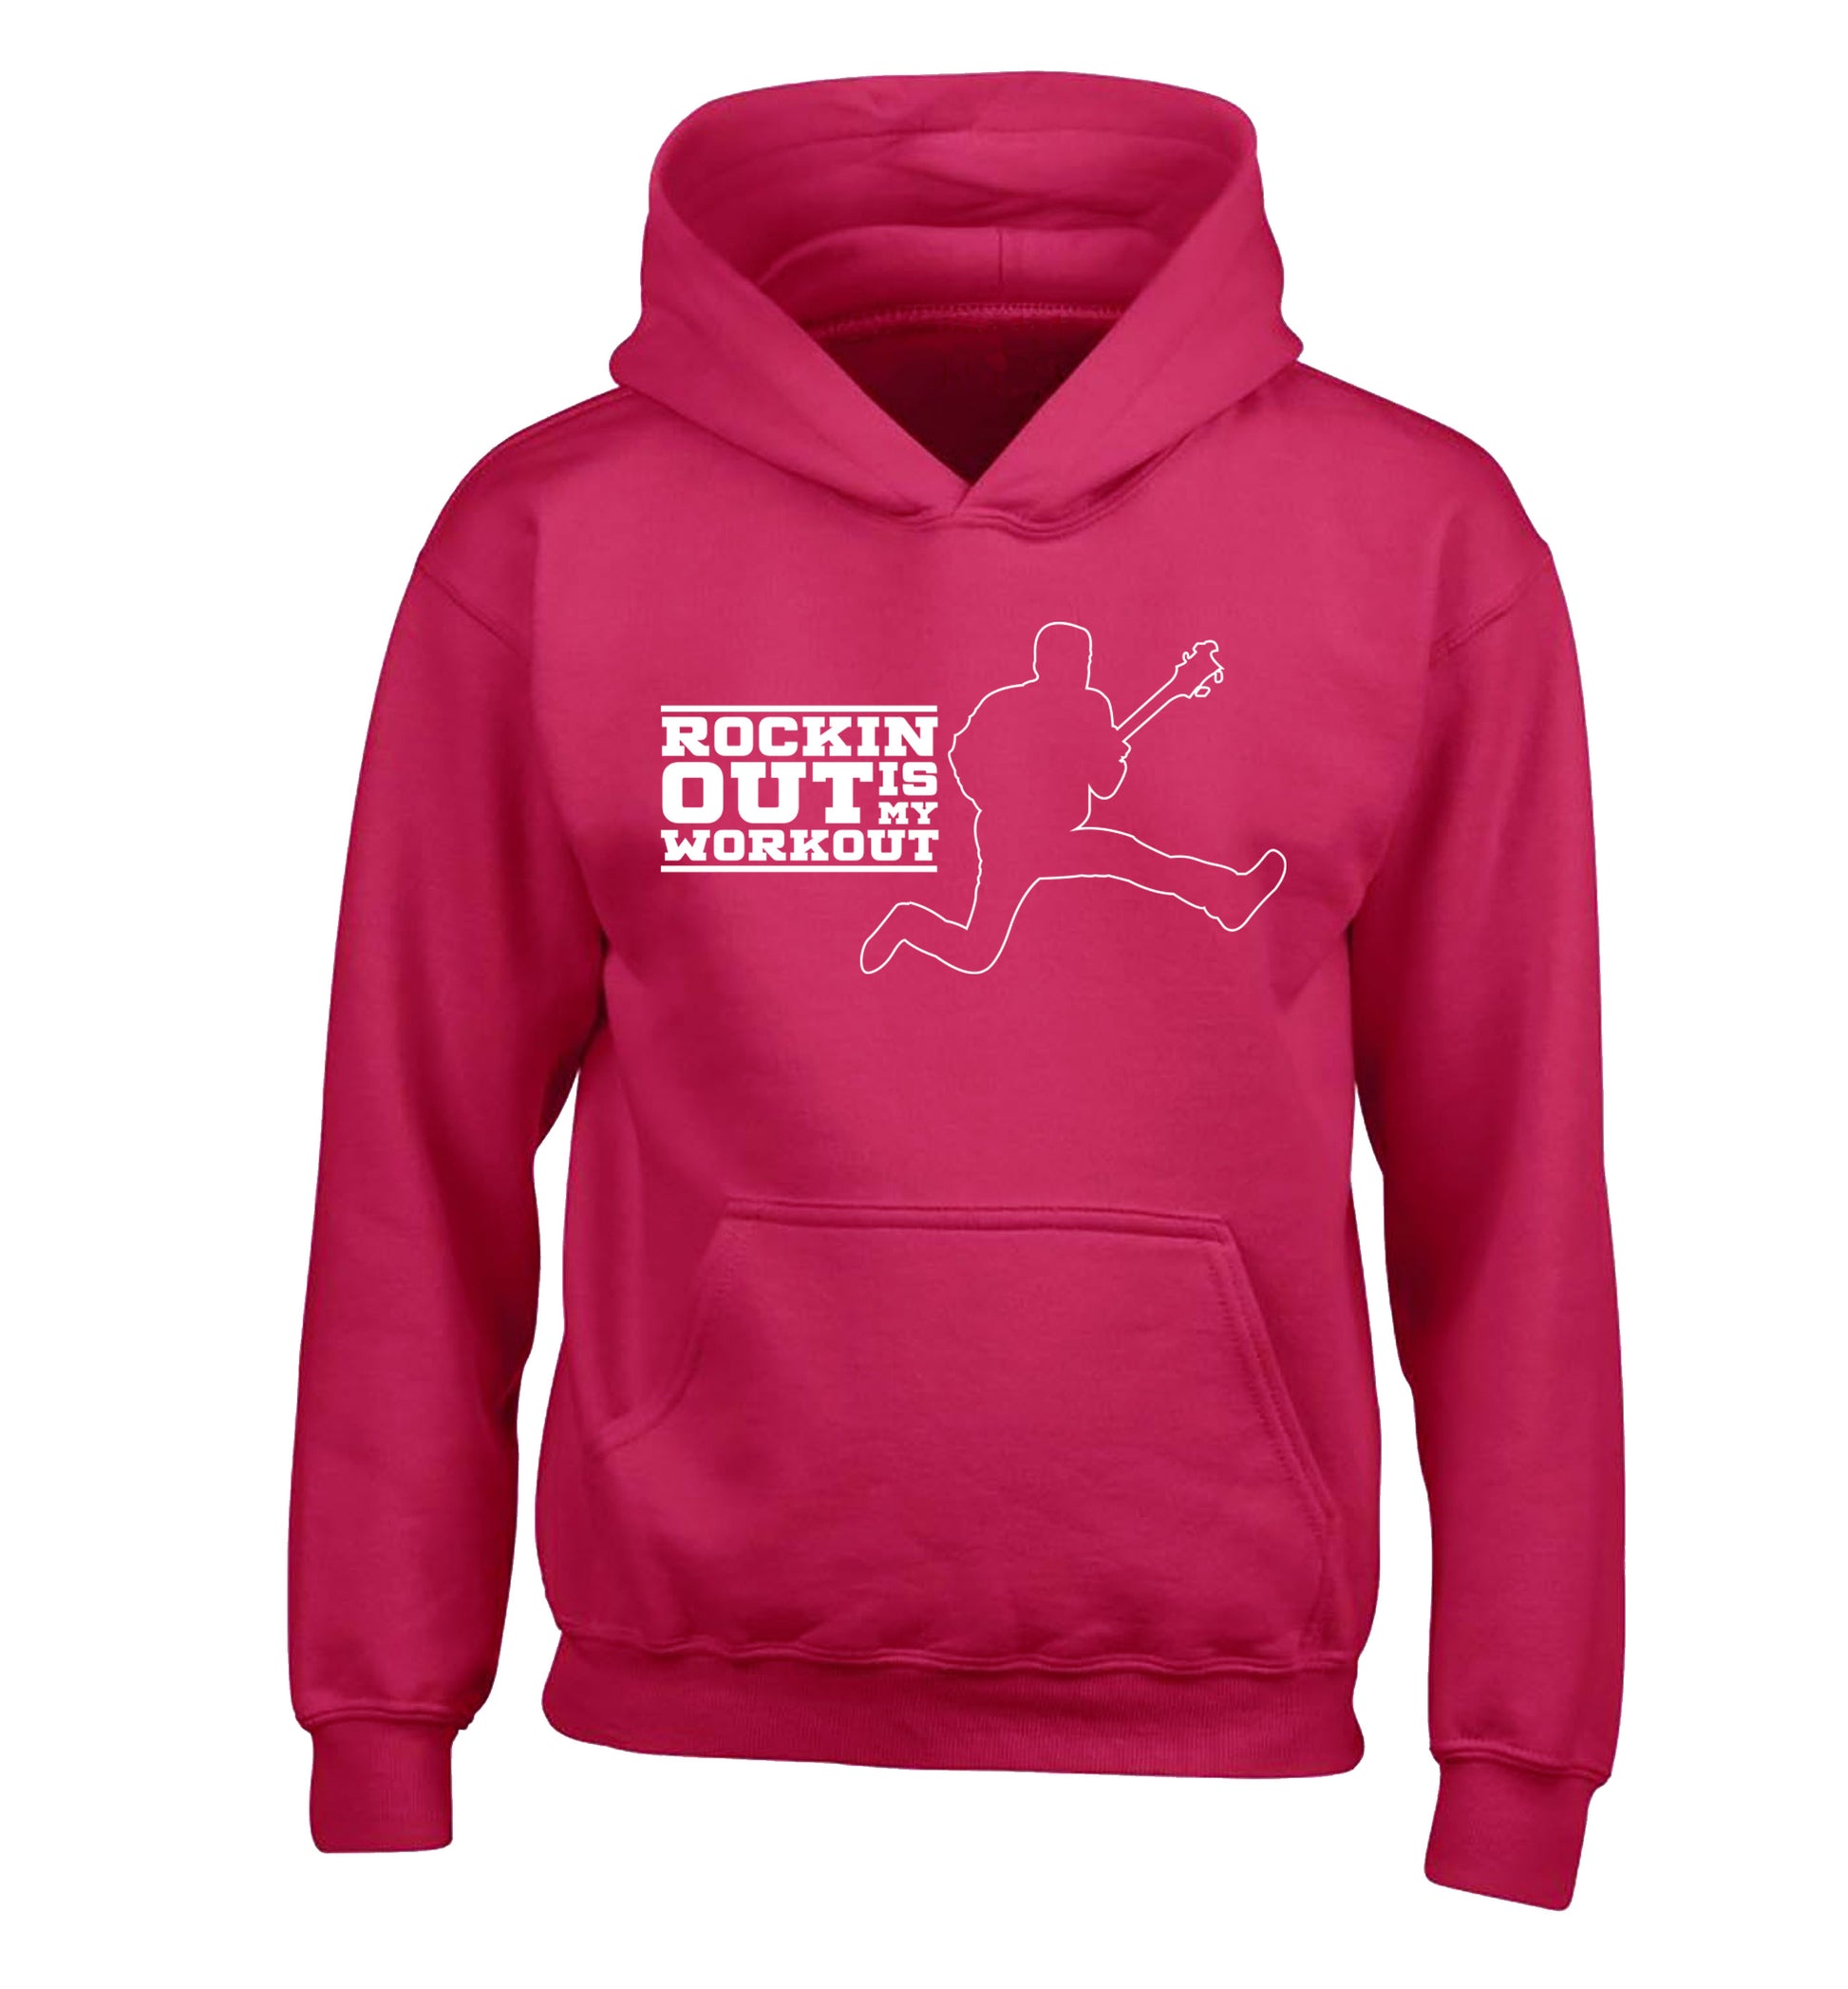 Rockin out is my workout children's pink hoodie 12-13 Years